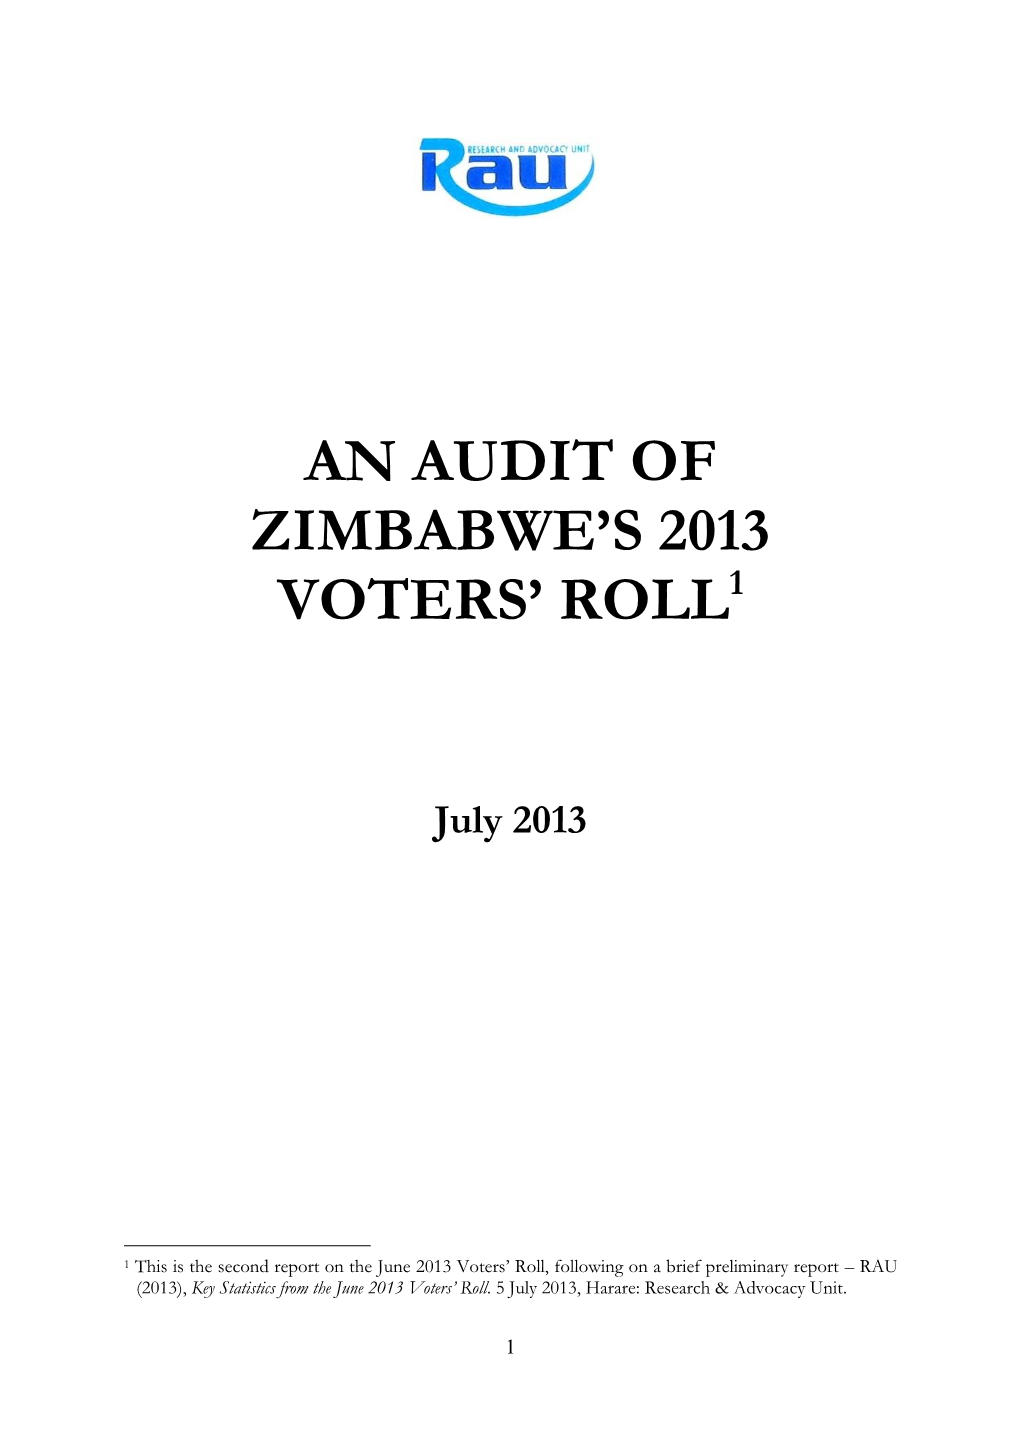 An Audit of Zimbabwe's Voters' Roll